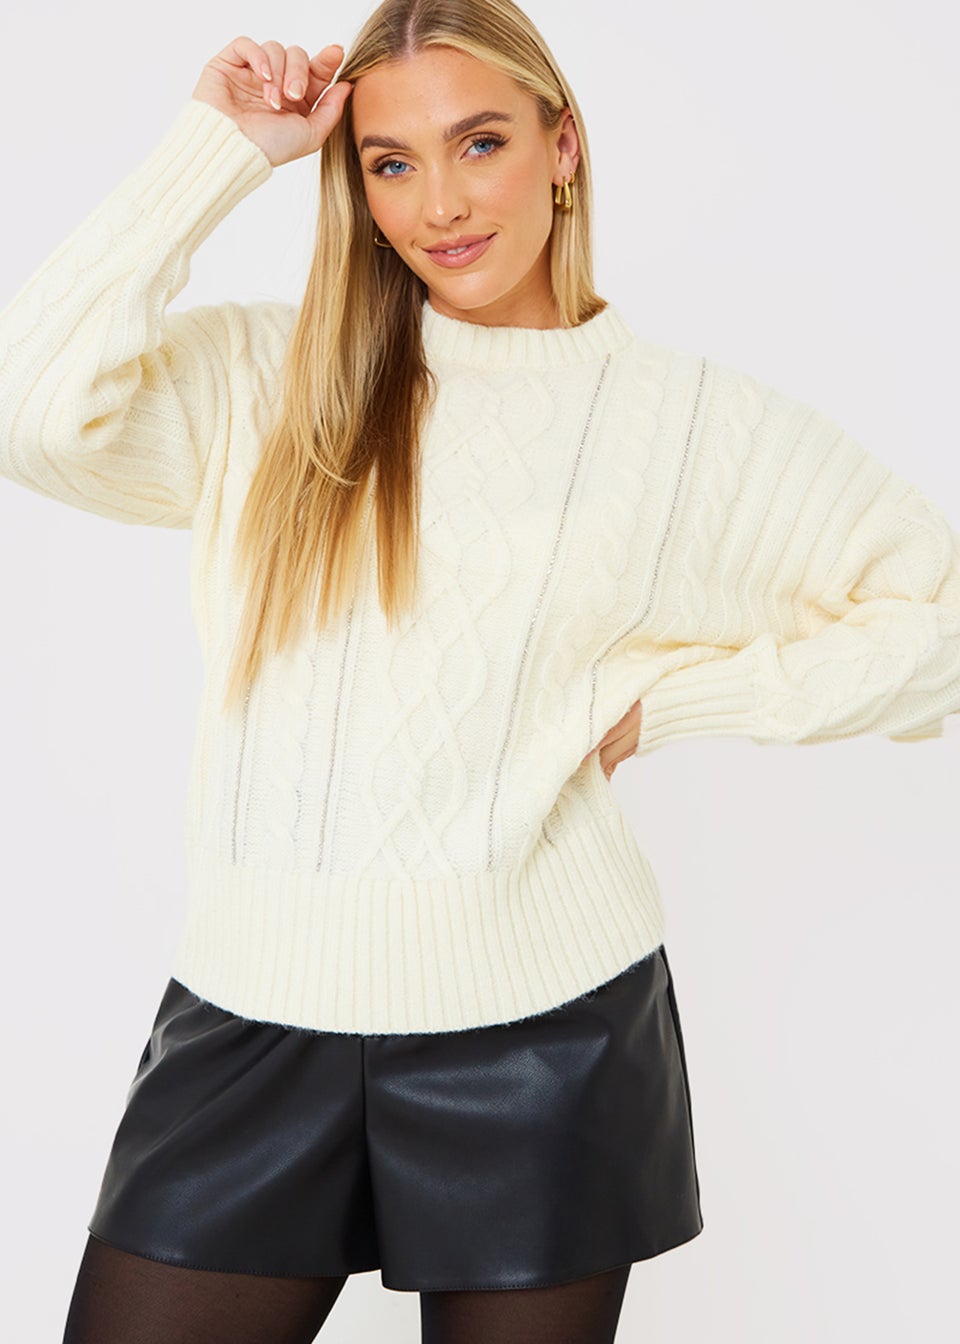 In The Style Stacey Solomon White Diamante Detail Jumper